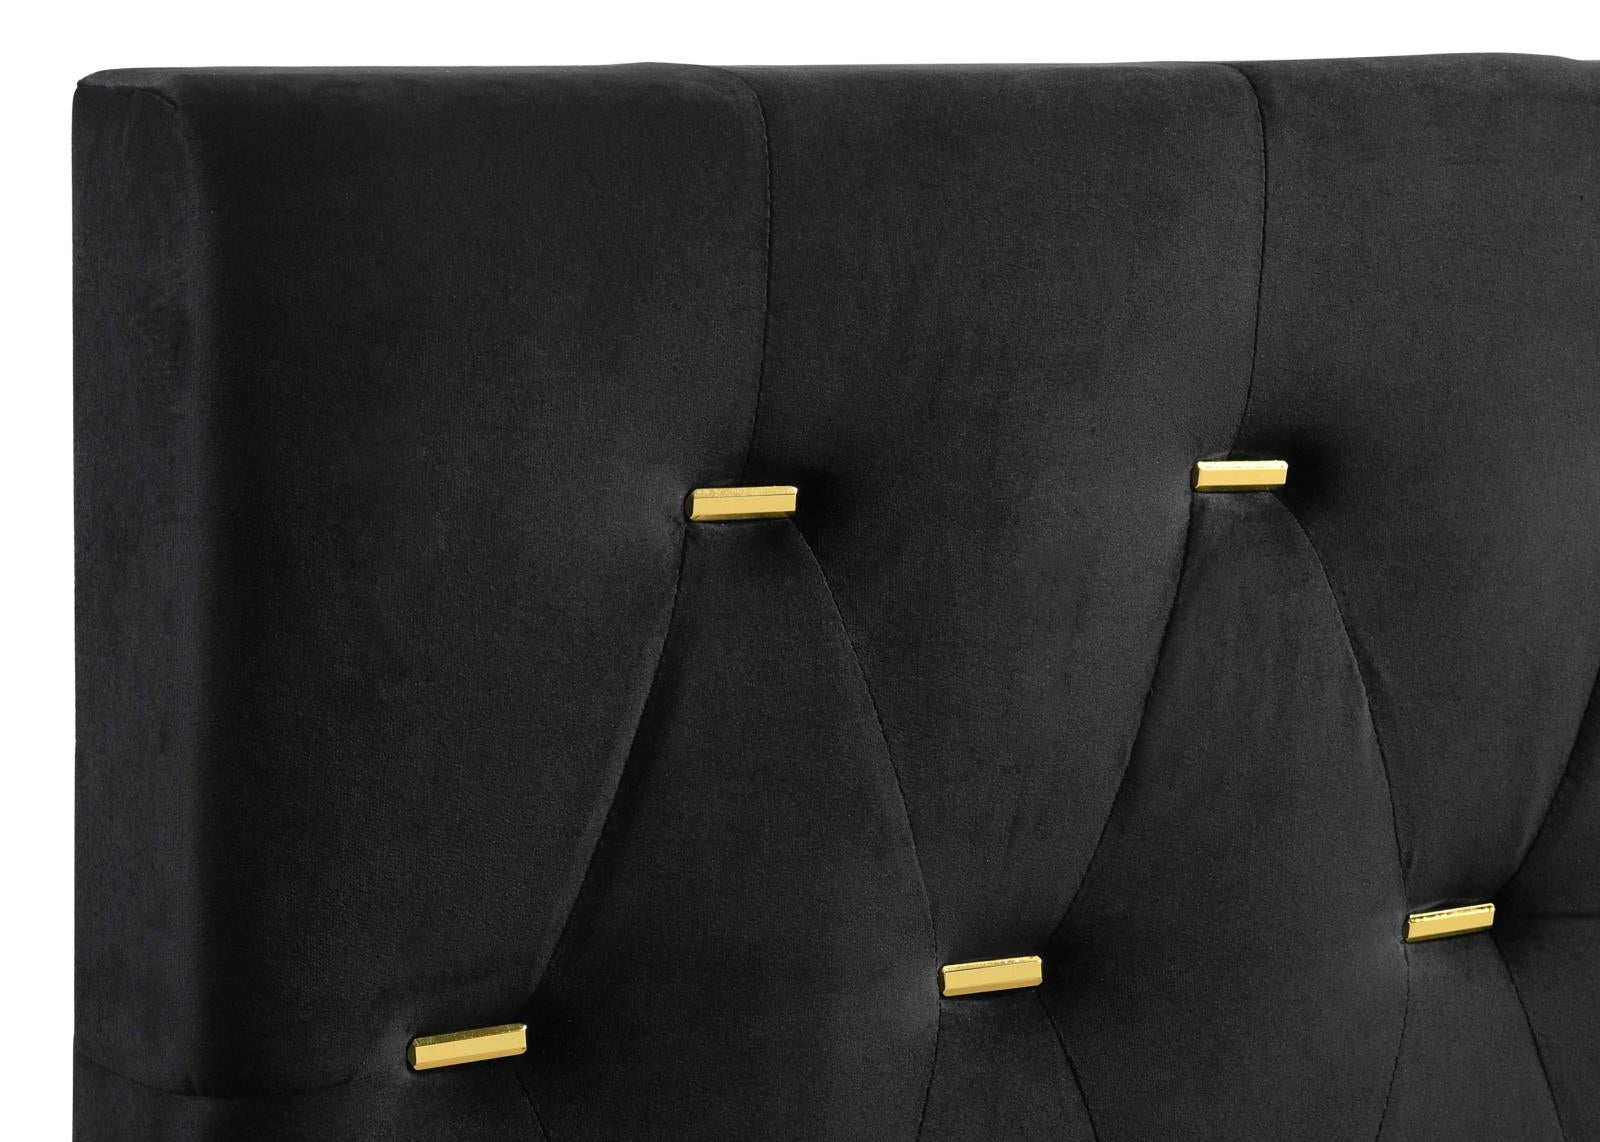 Kendall Tufted Panel Queen Bed Black/Gold - 224451Q - Bien Home Furniture &amp; Electronics